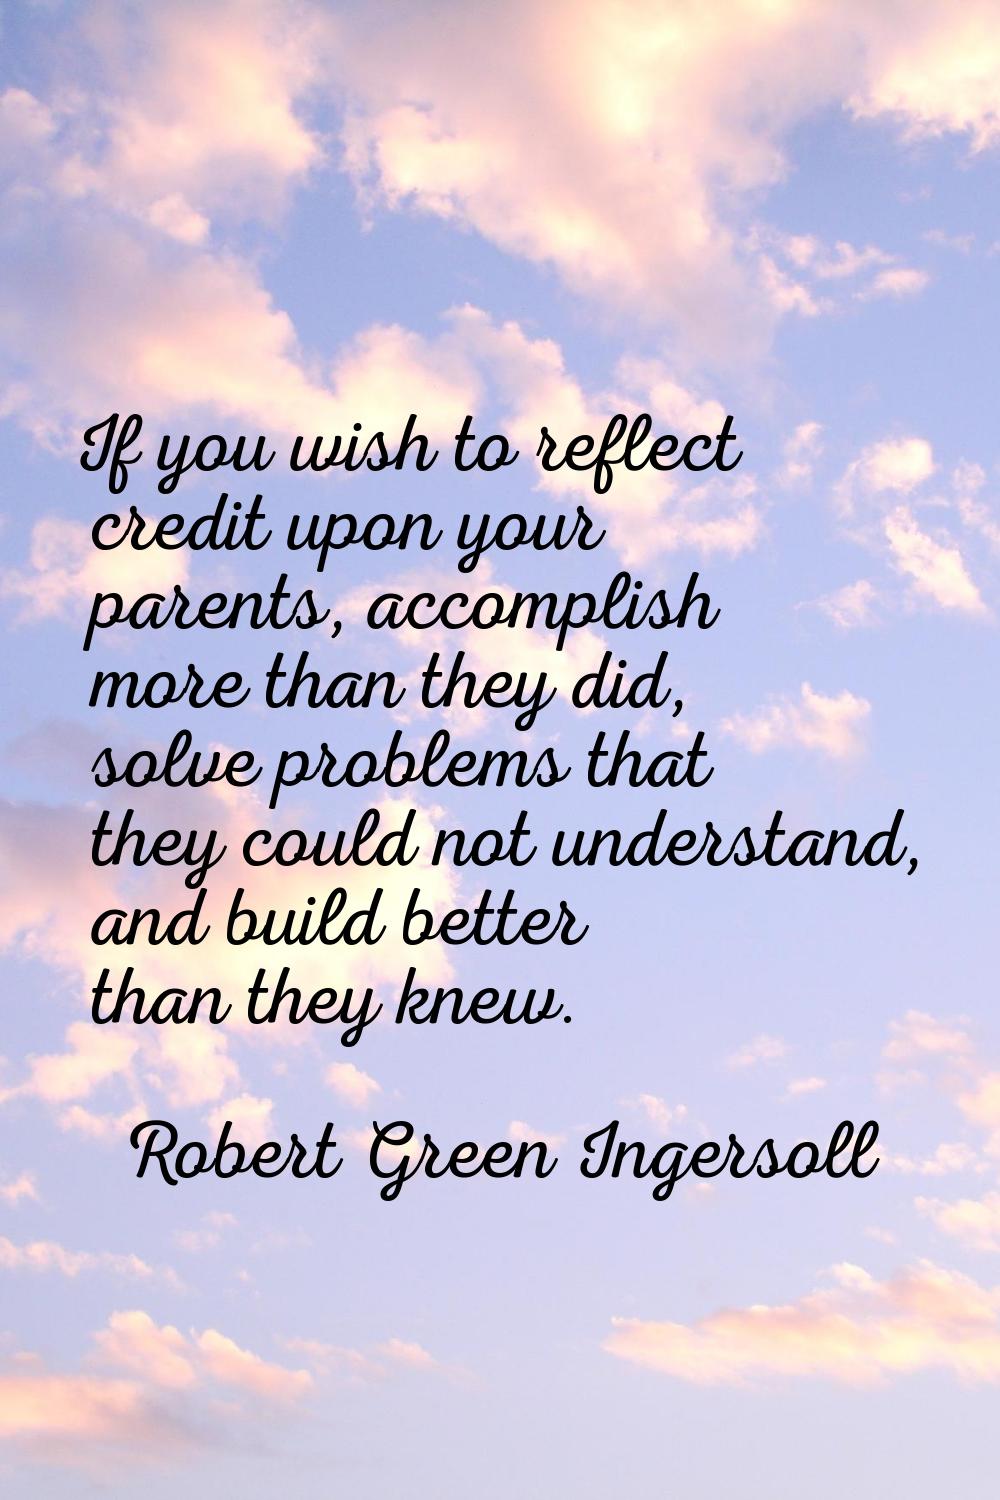 If you wish to reflect credit upon your parents, accomplish more than they did, solve problems that